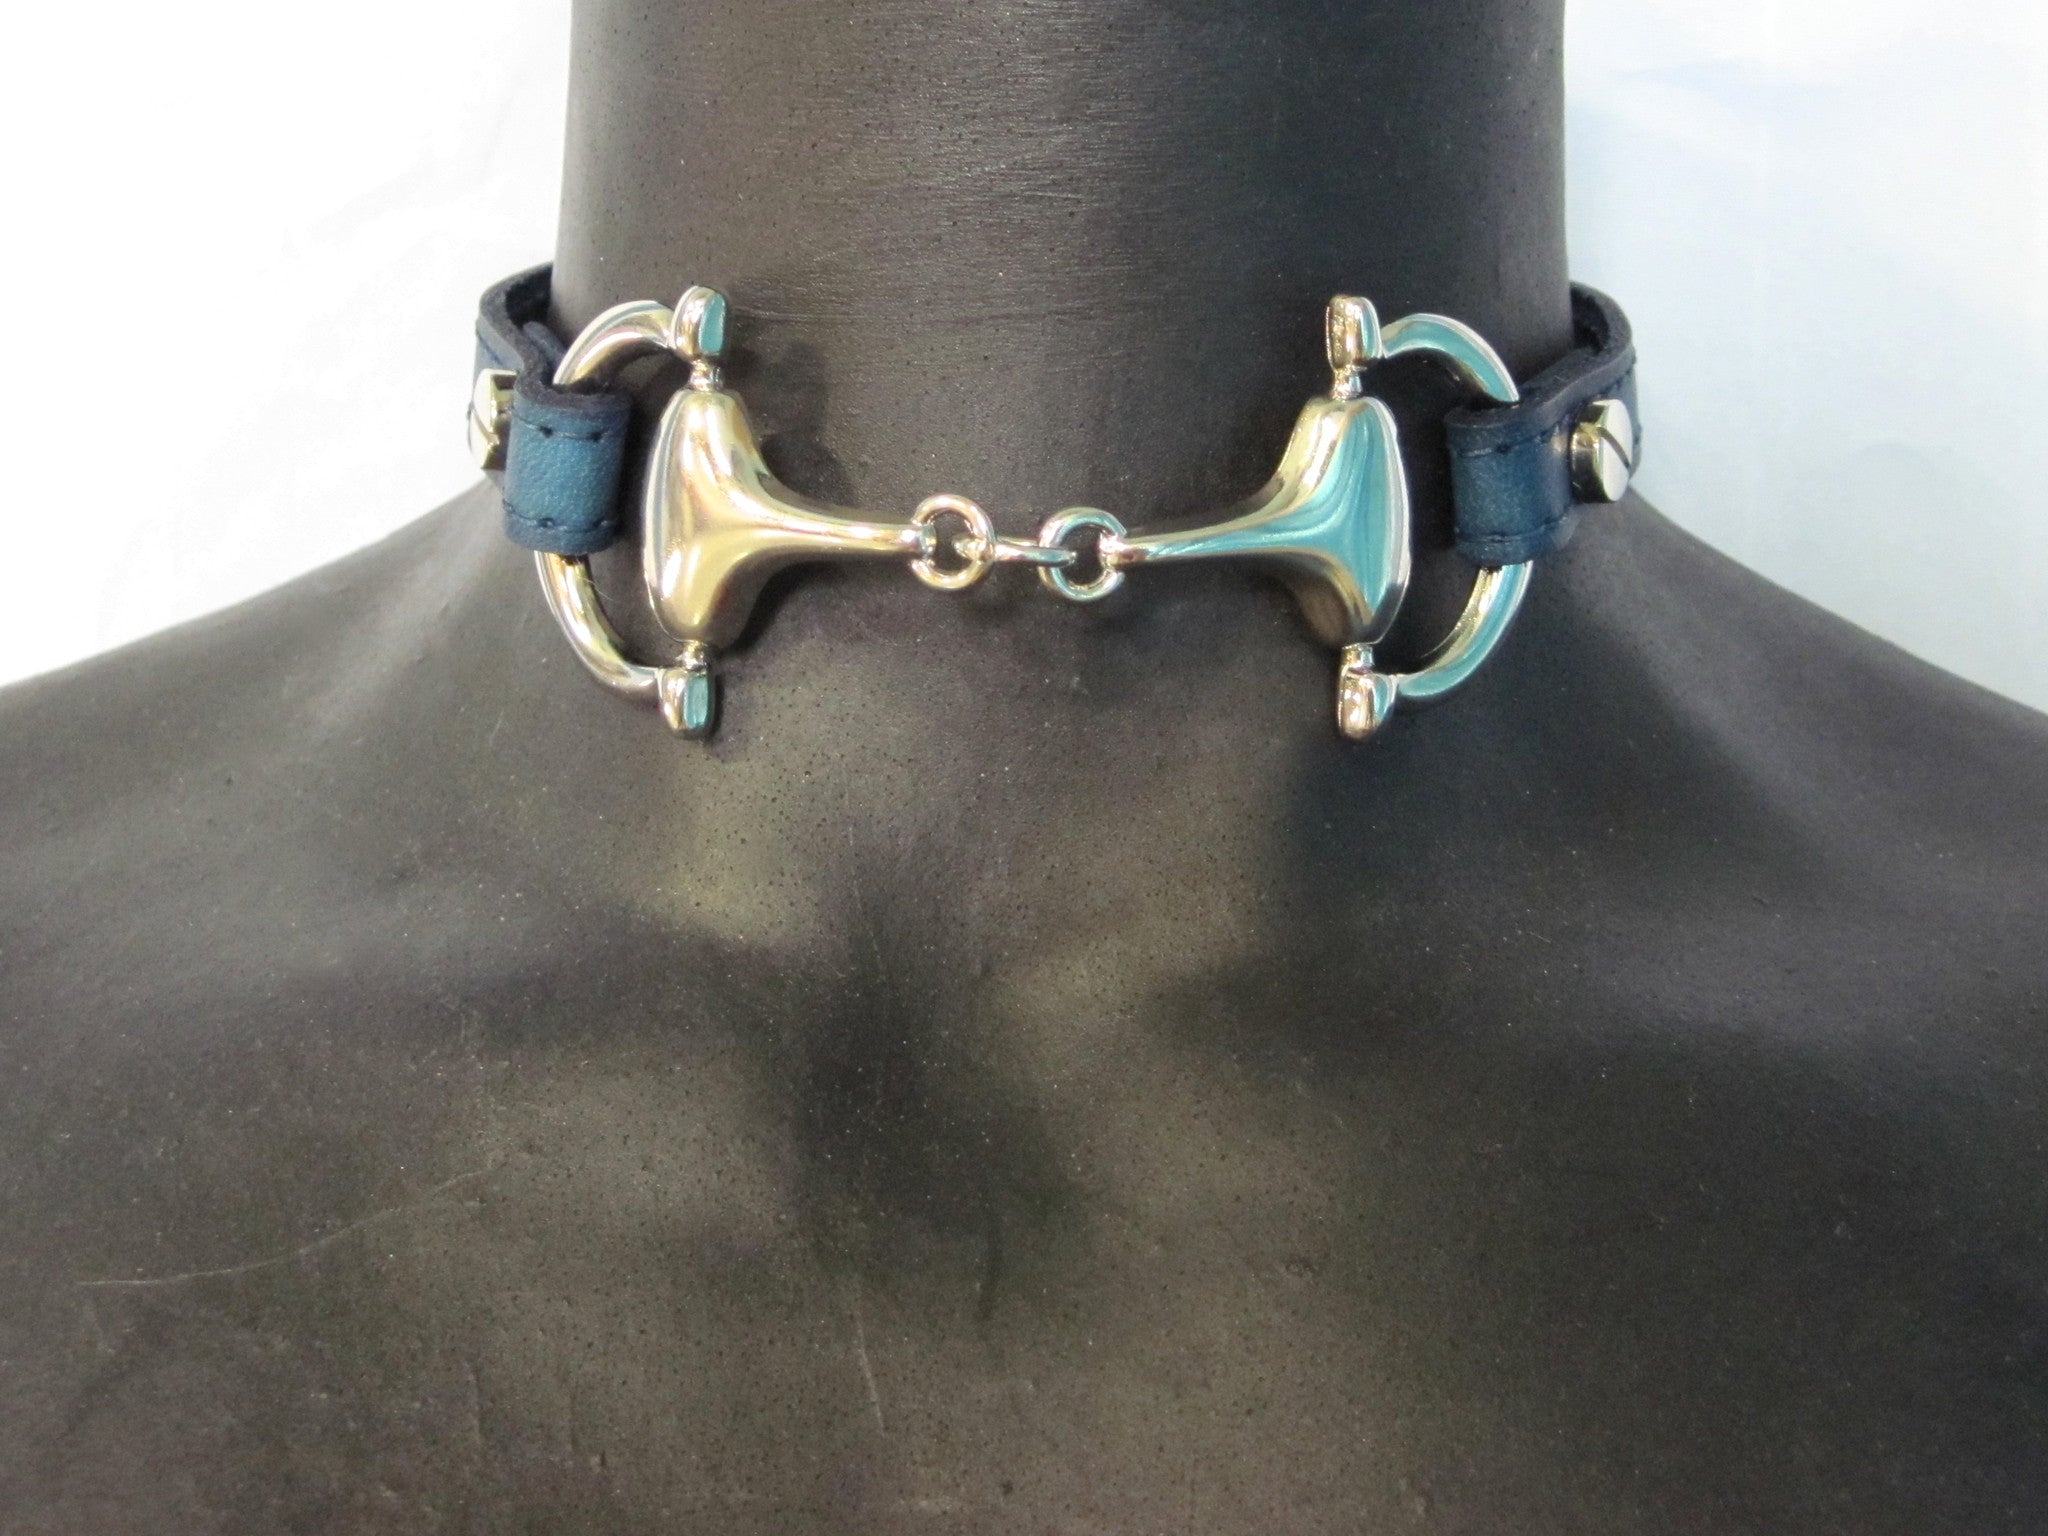 LEATHER CHOKER NECKLACE WITH D-RING HORSE BIT PENDANT by nyet jewelry